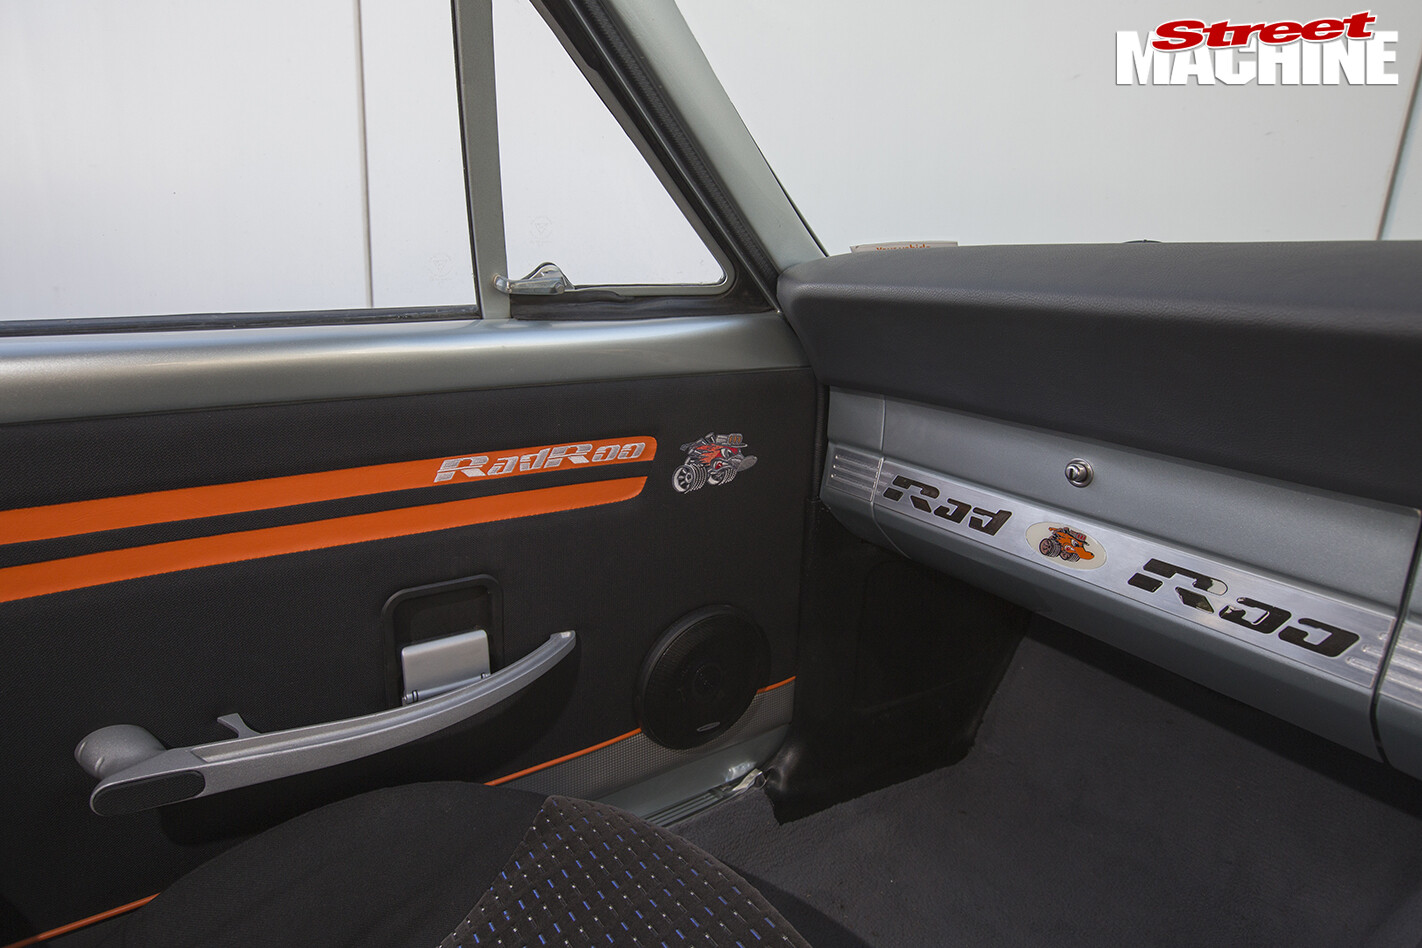 Ford -XY-Falcon -interior -front -detail